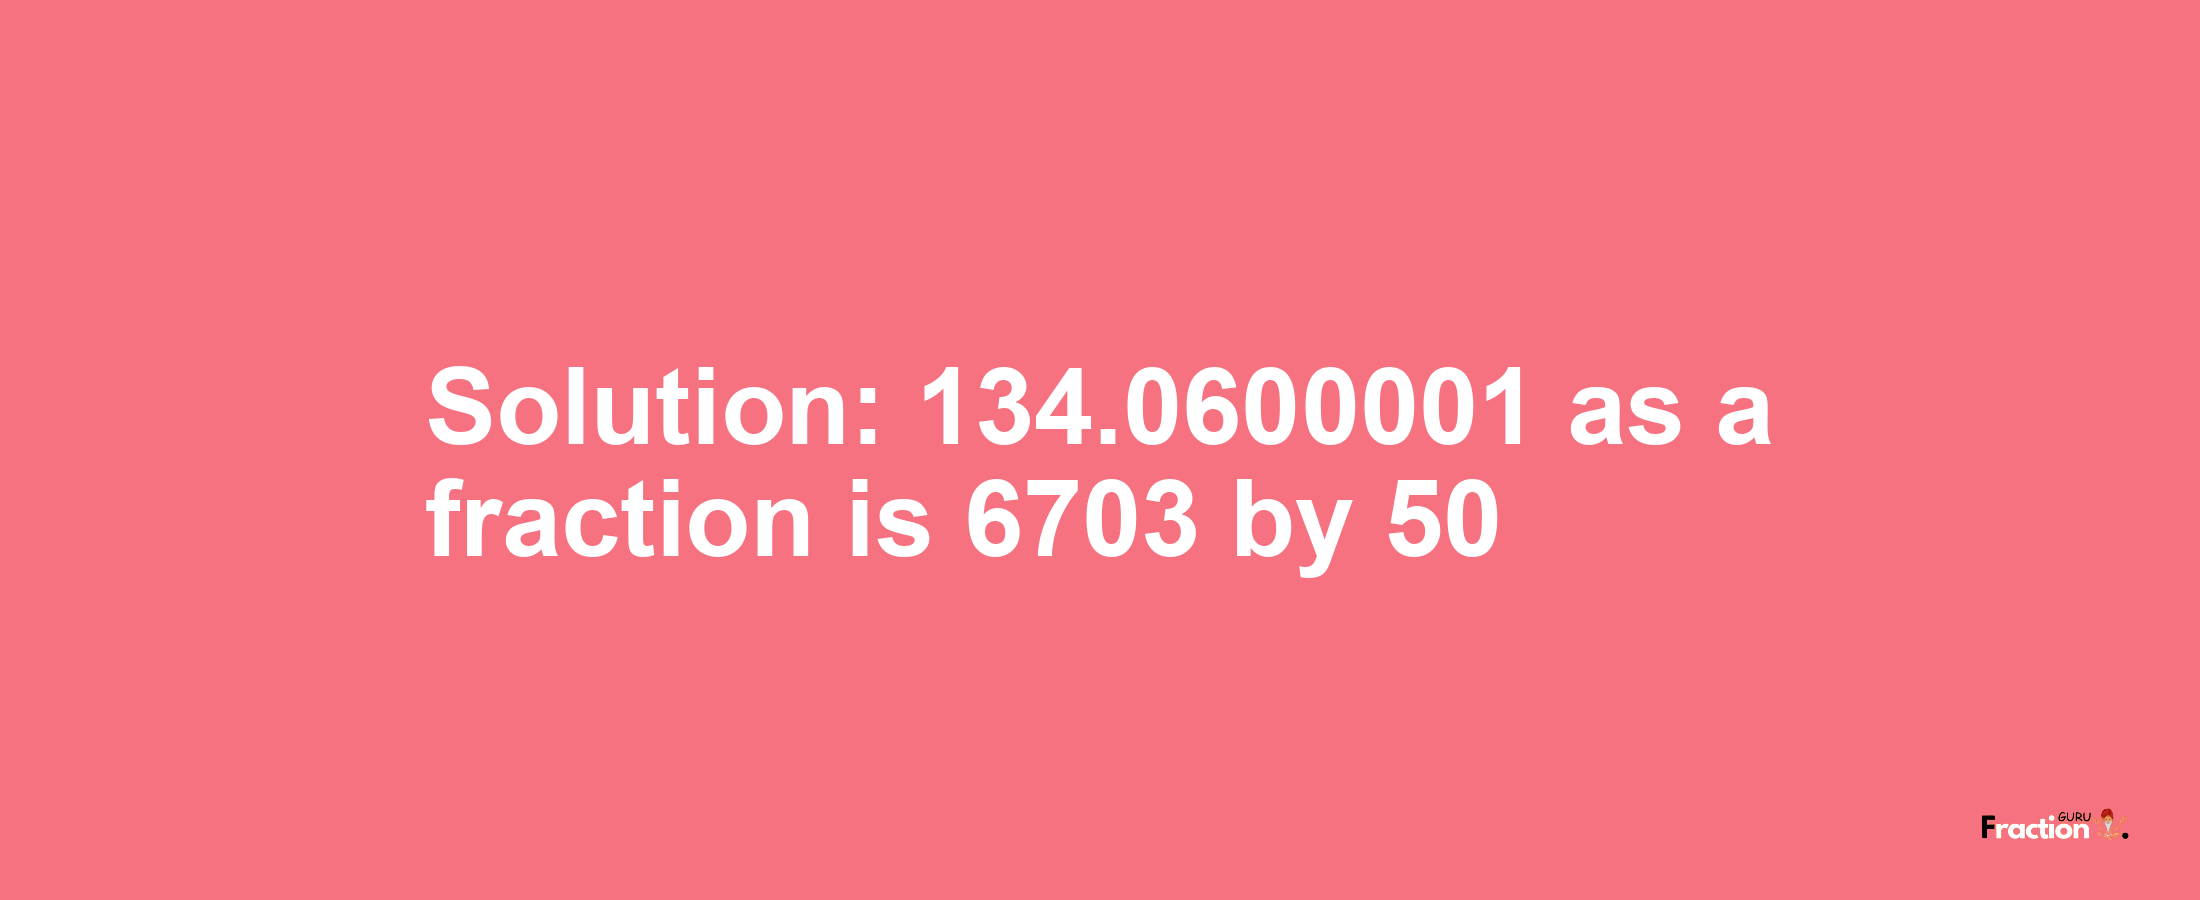 Solution:134.0600001 as a fraction is 6703/50